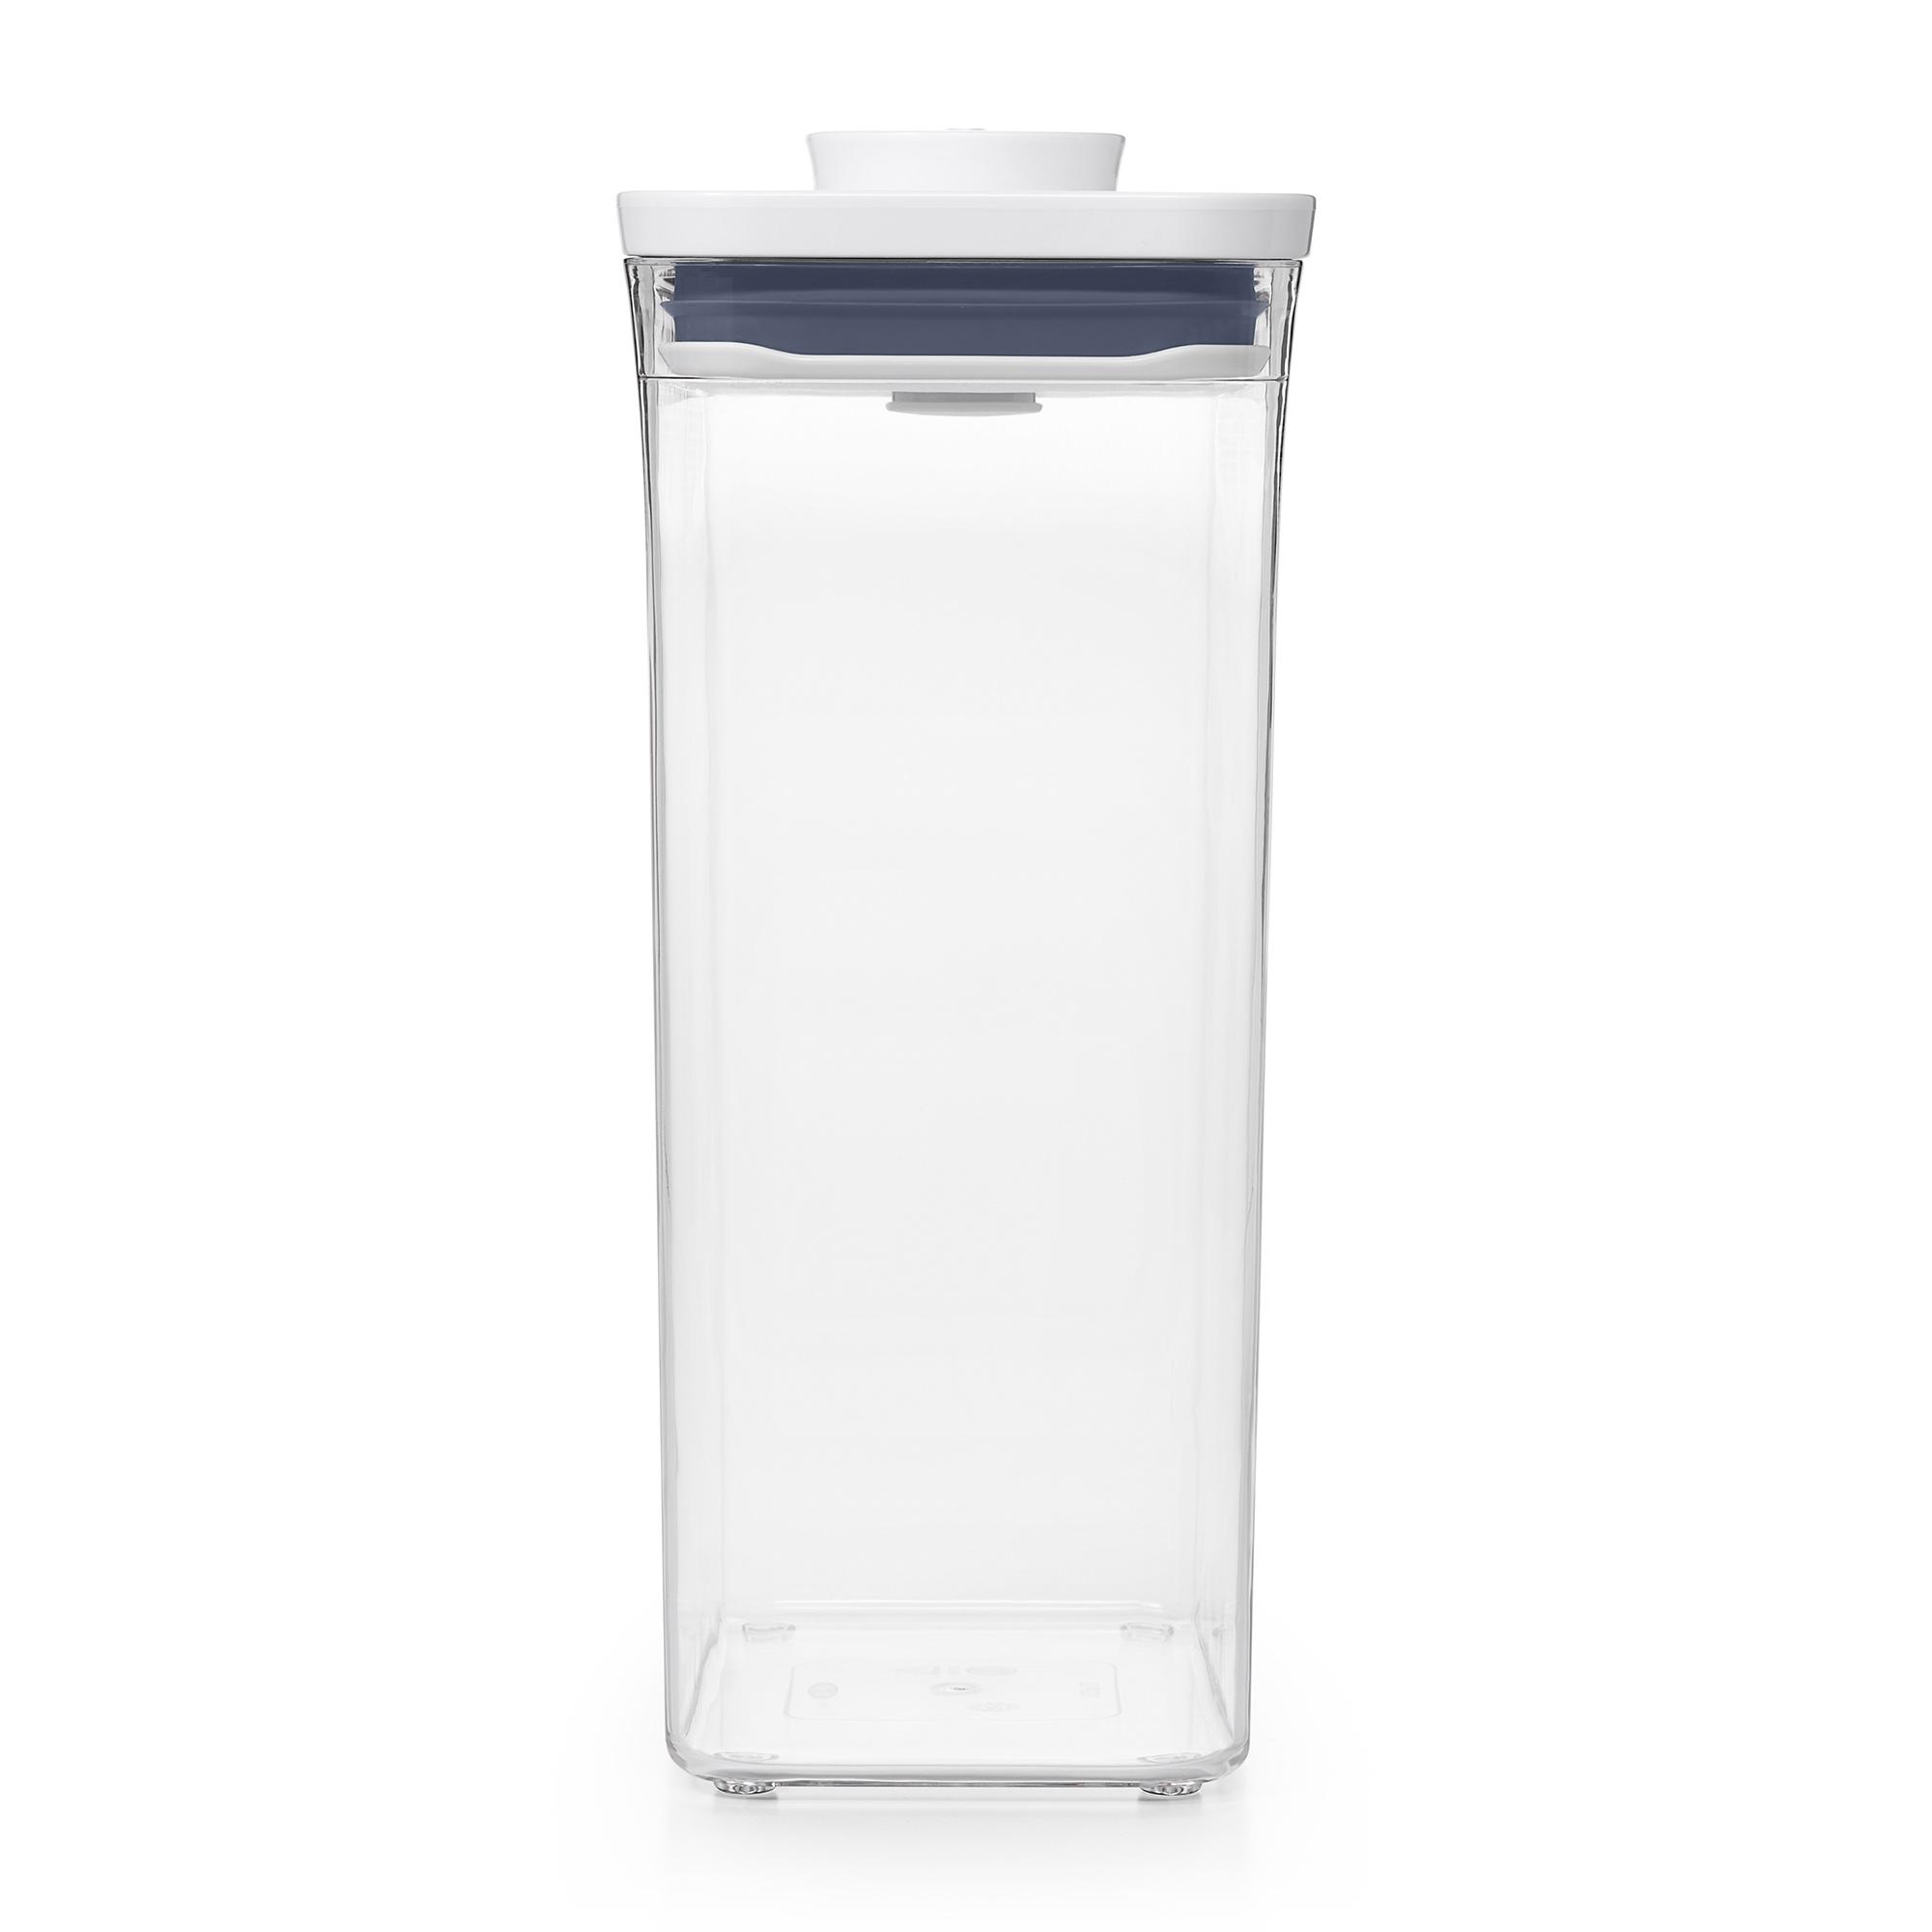 OXO Good Grips Rectangular Pop 2.0 Container 2.6L Image 3